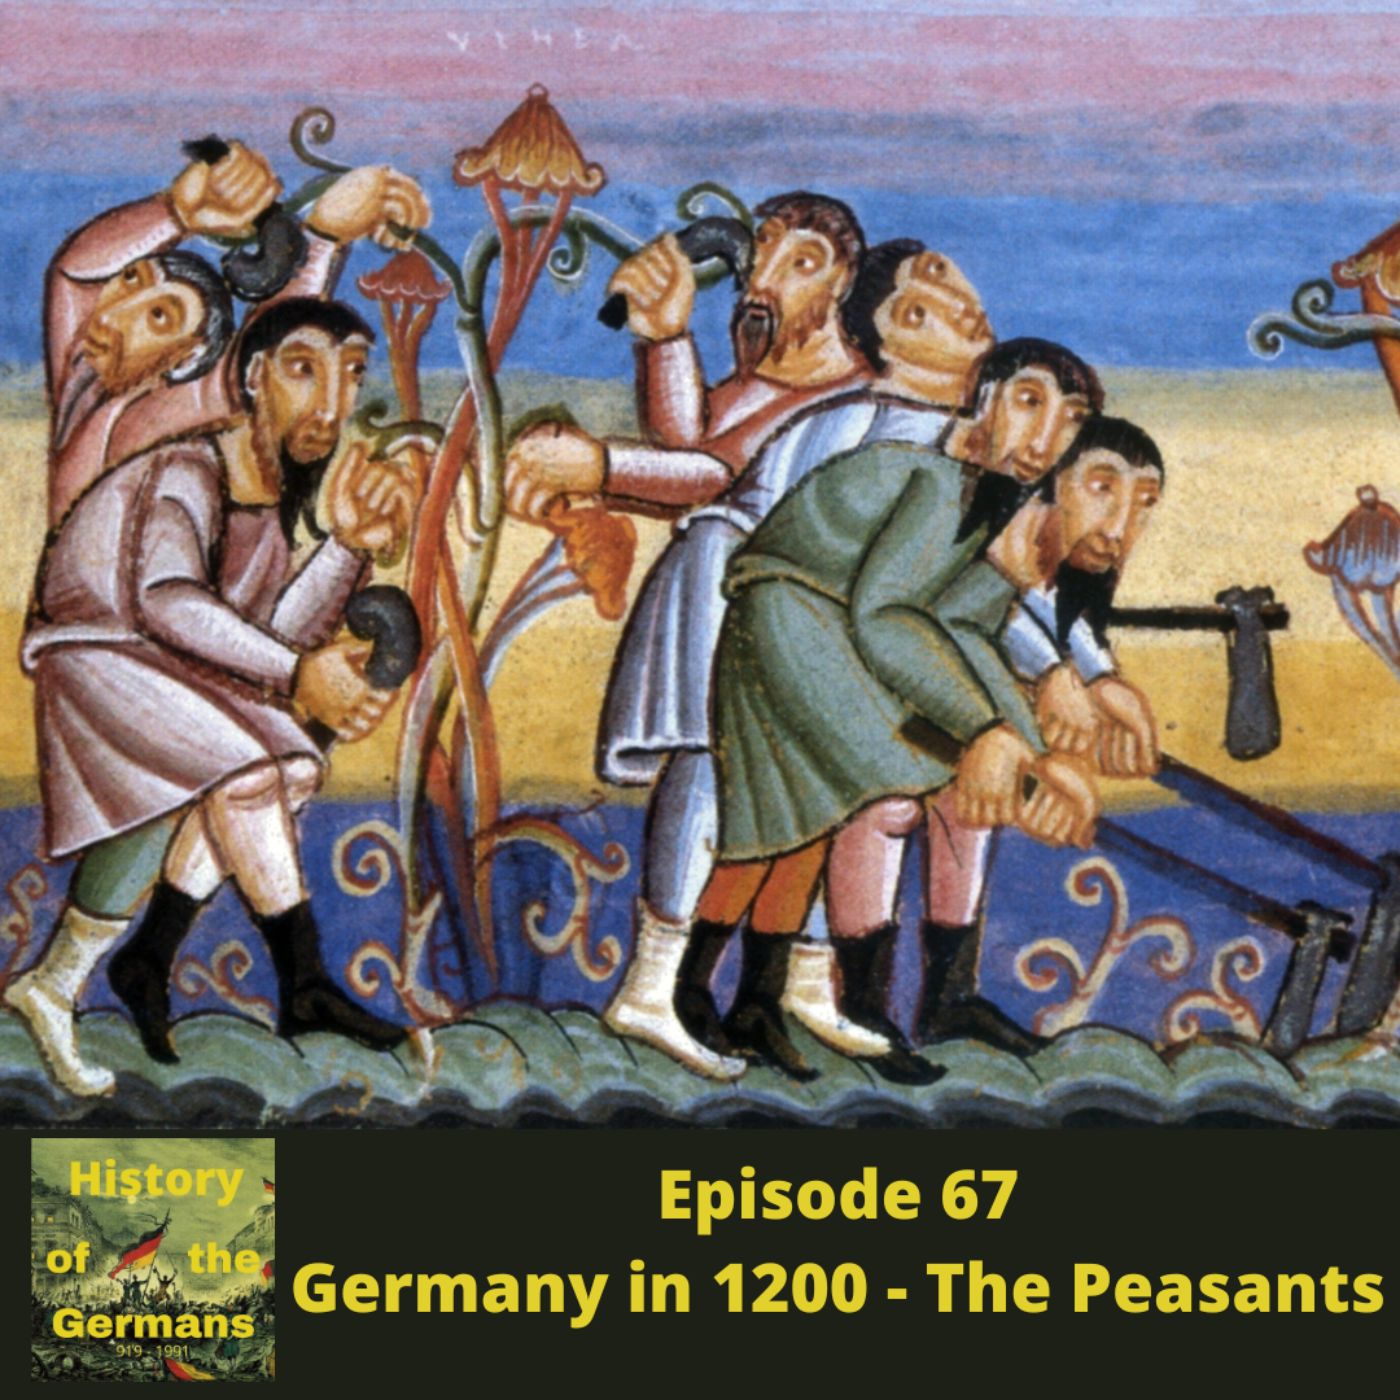 Artwork for History of the Germans